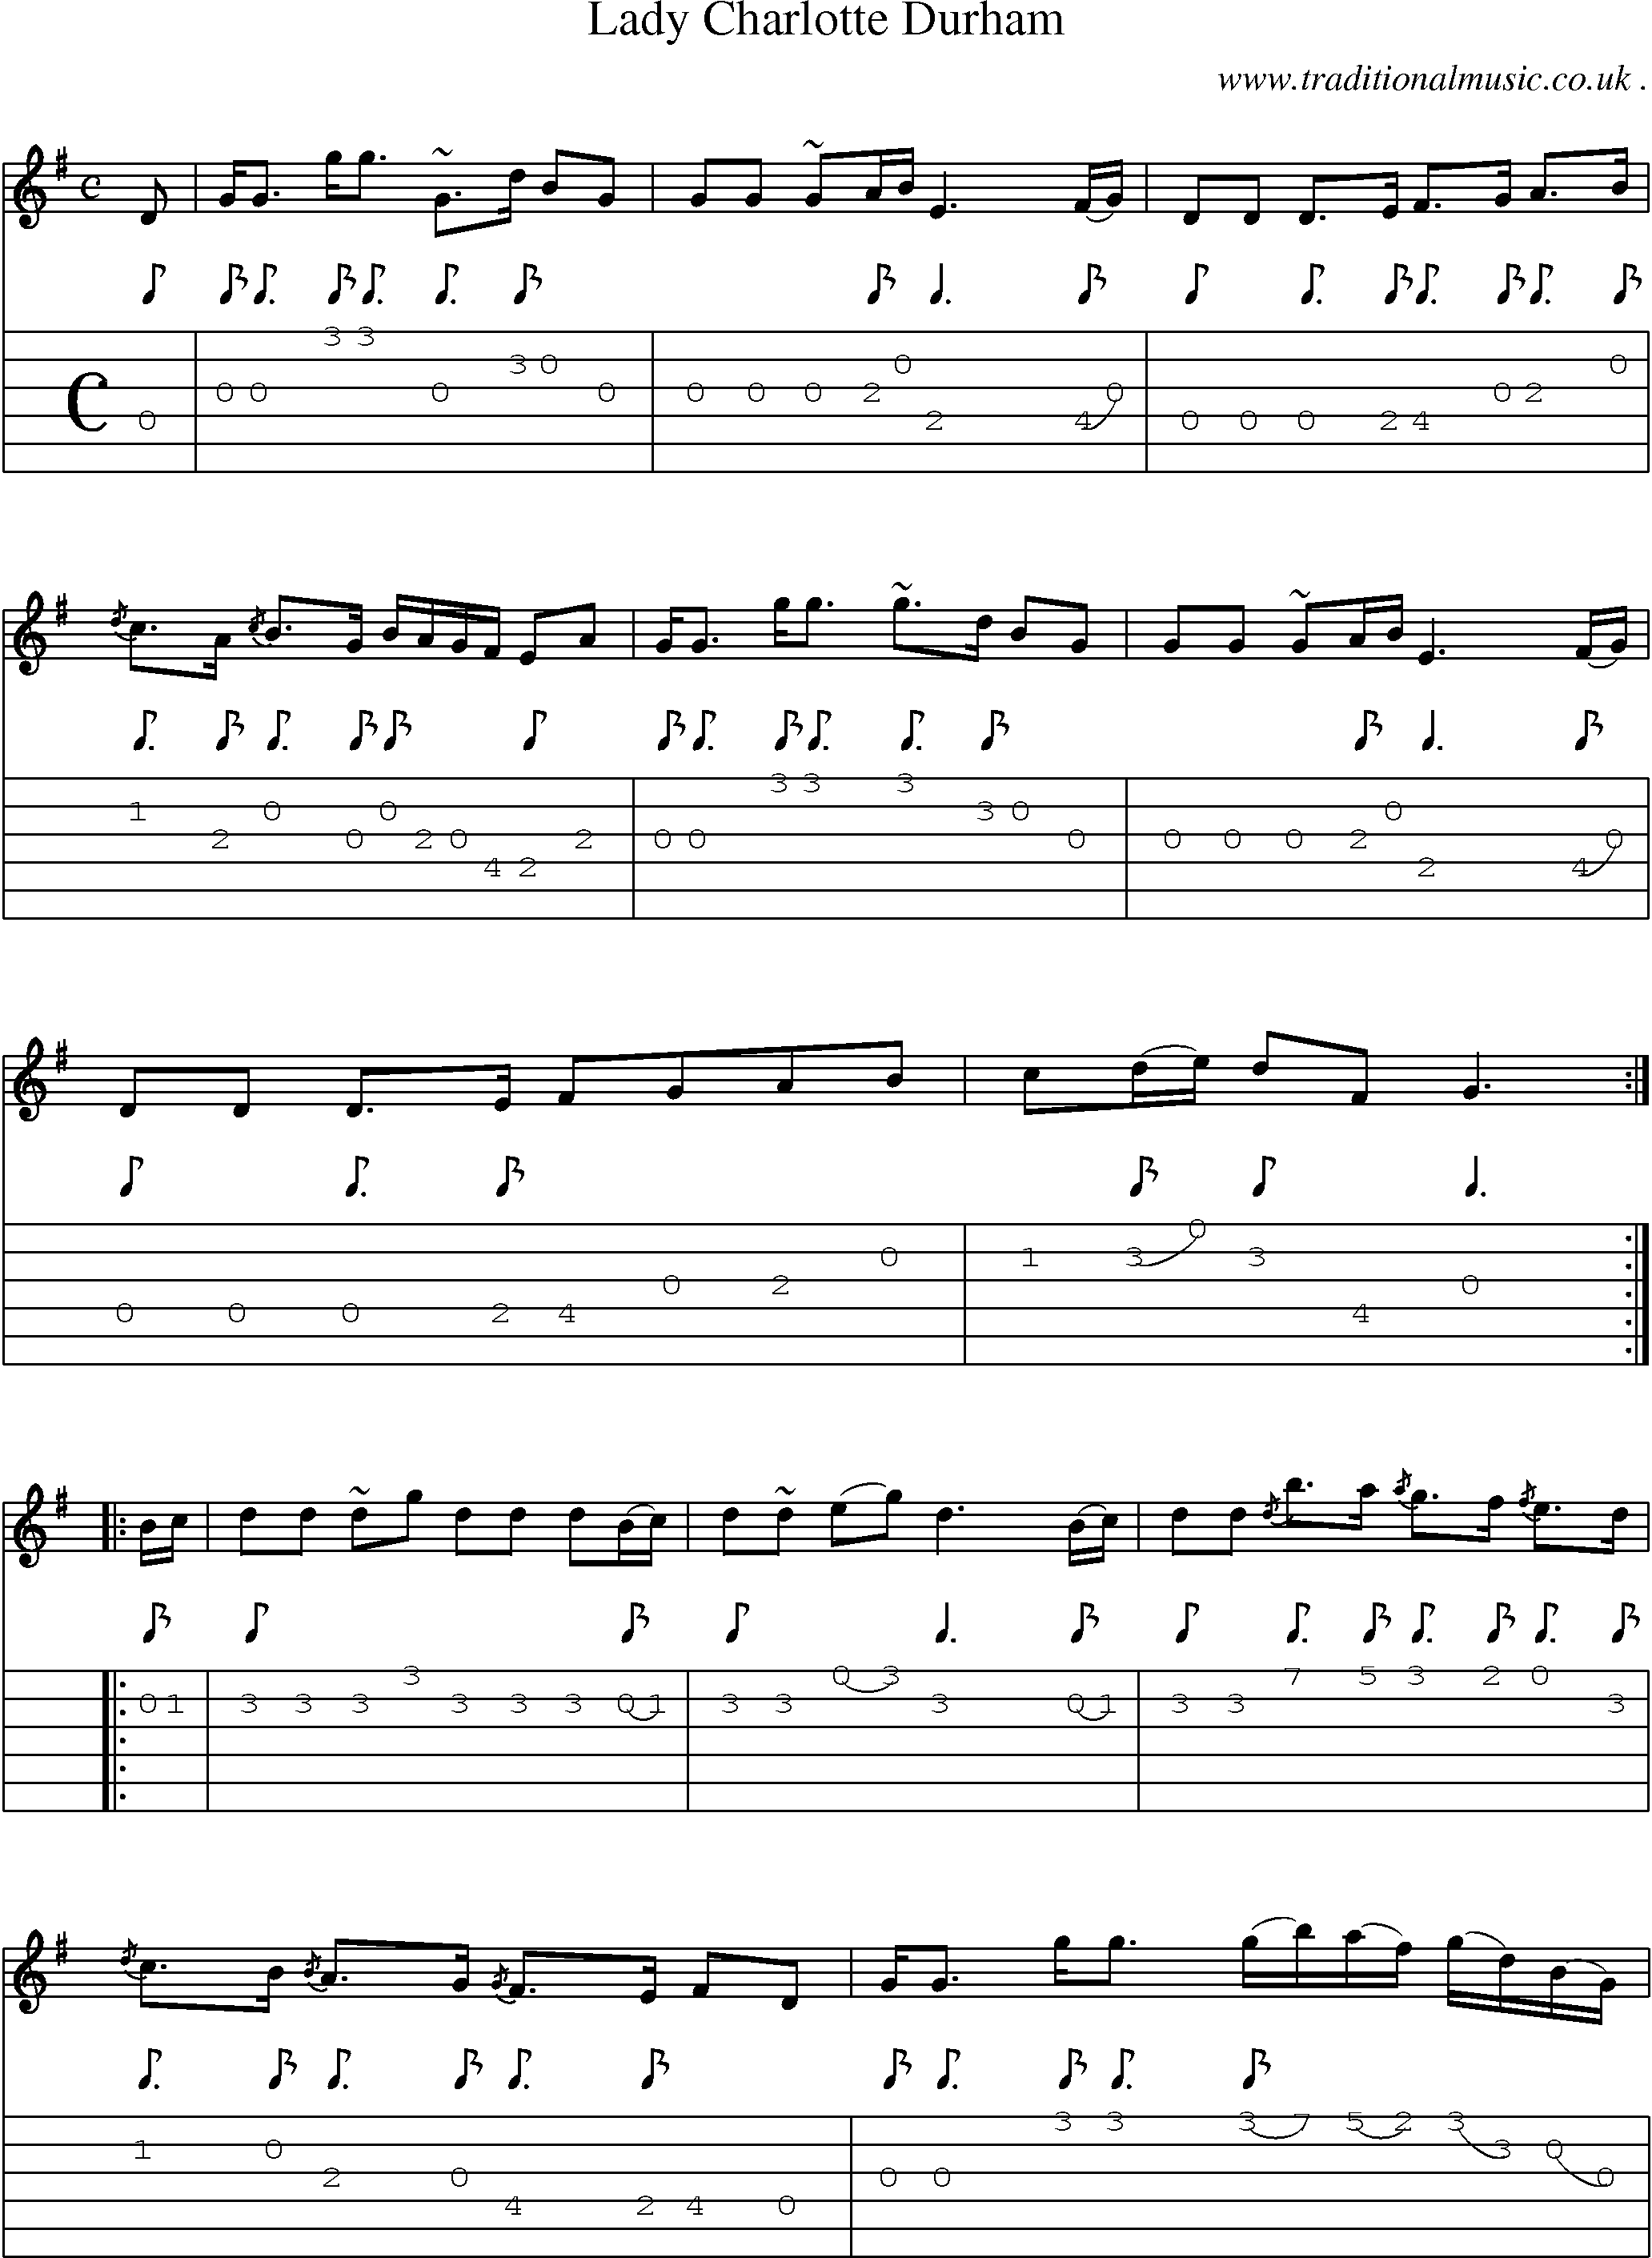 Sheet-music  score, Chords and Guitar Tabs for Lady Charlotte Durham